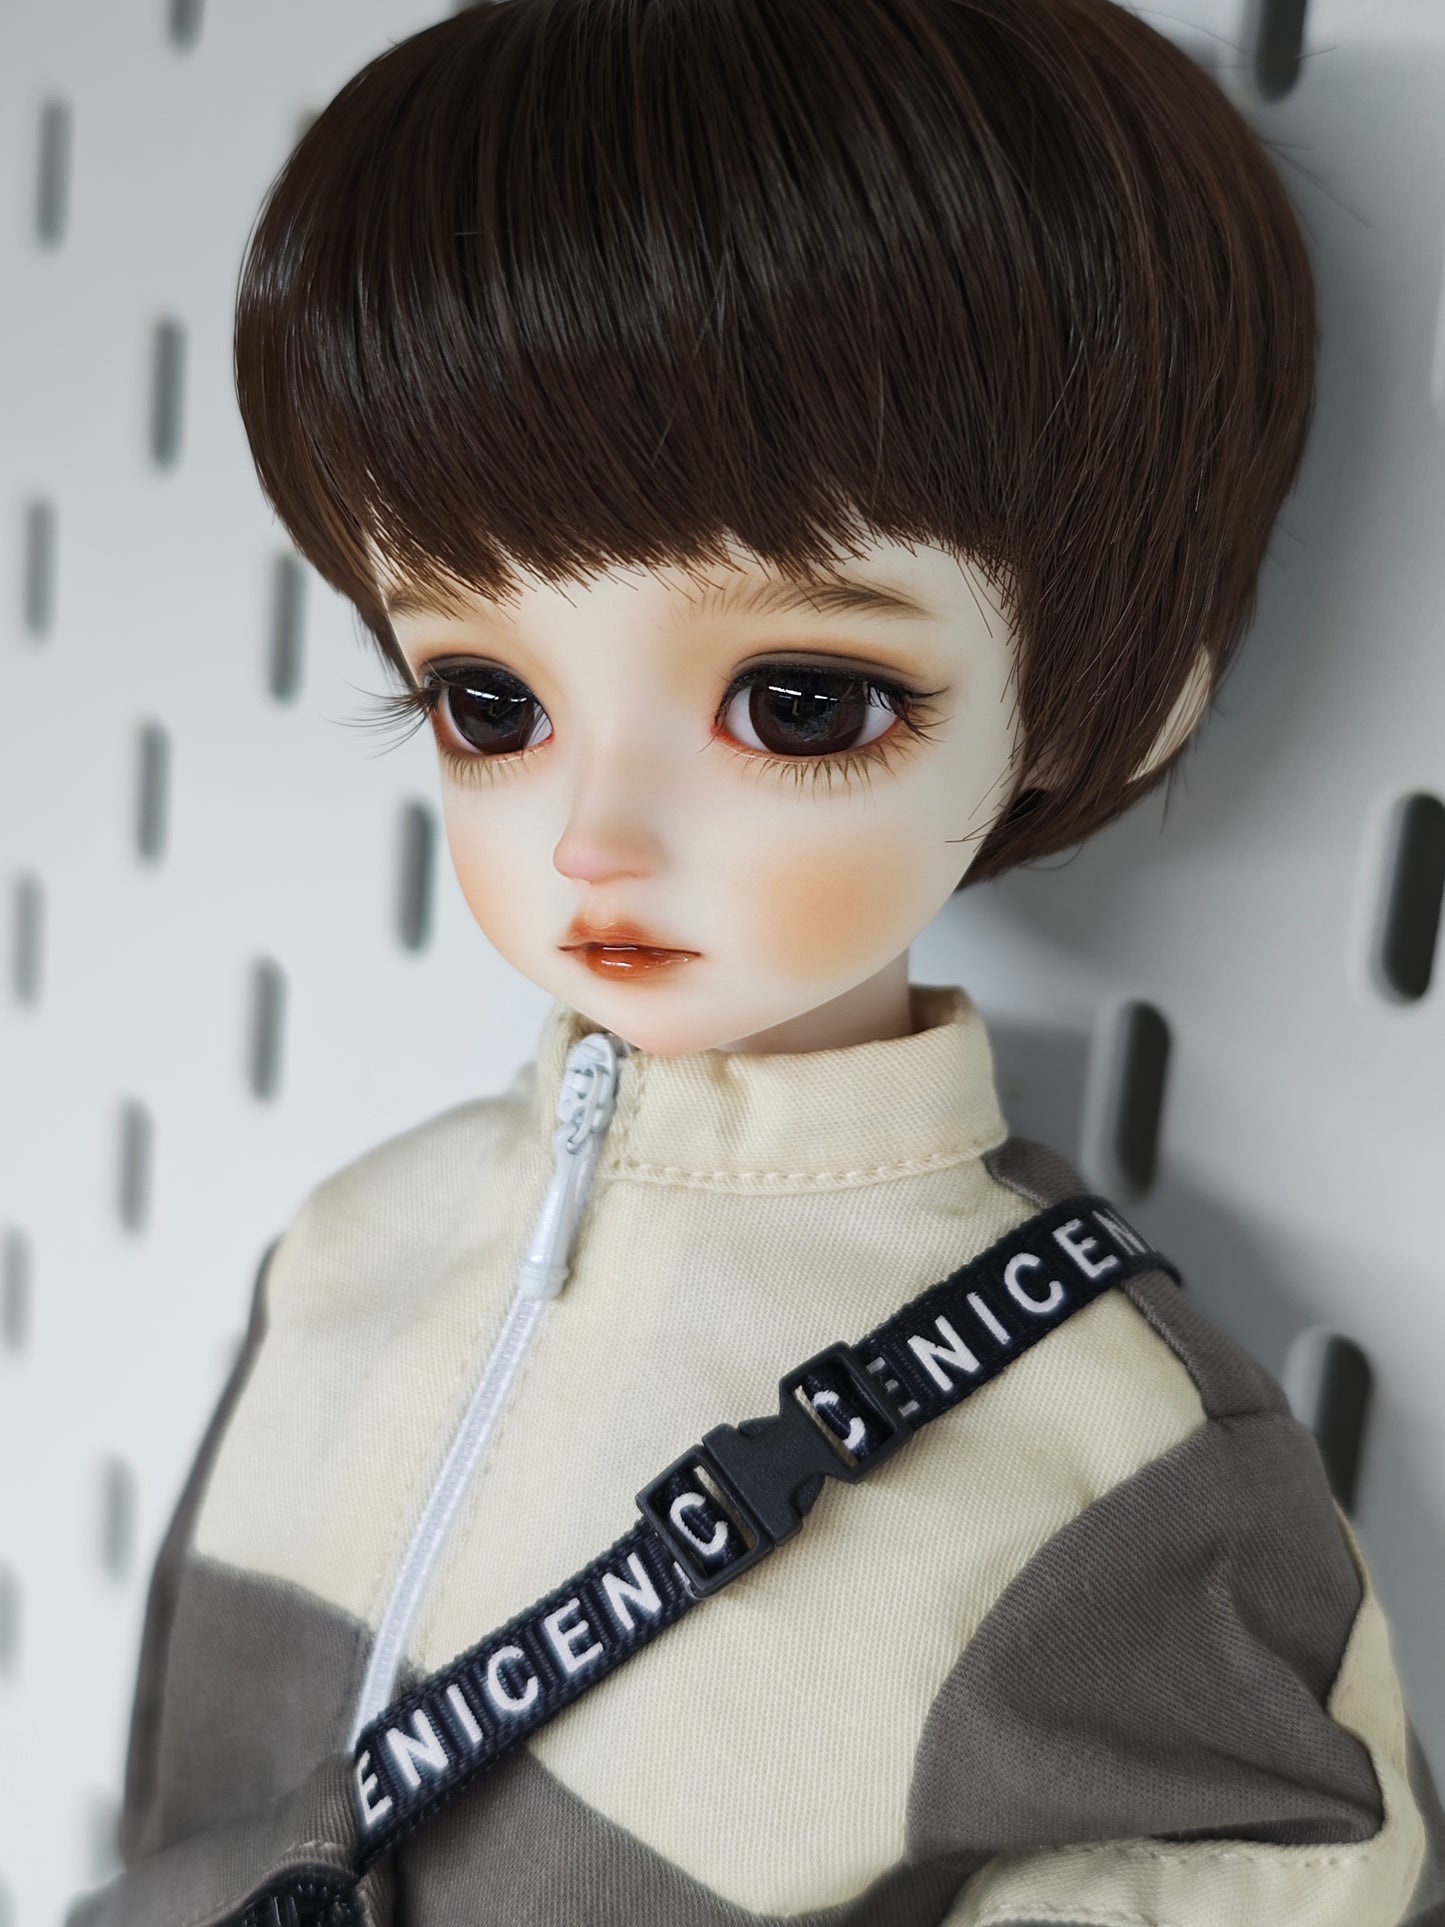 1/6 28cm boy doll Tony in normal skin with makeup